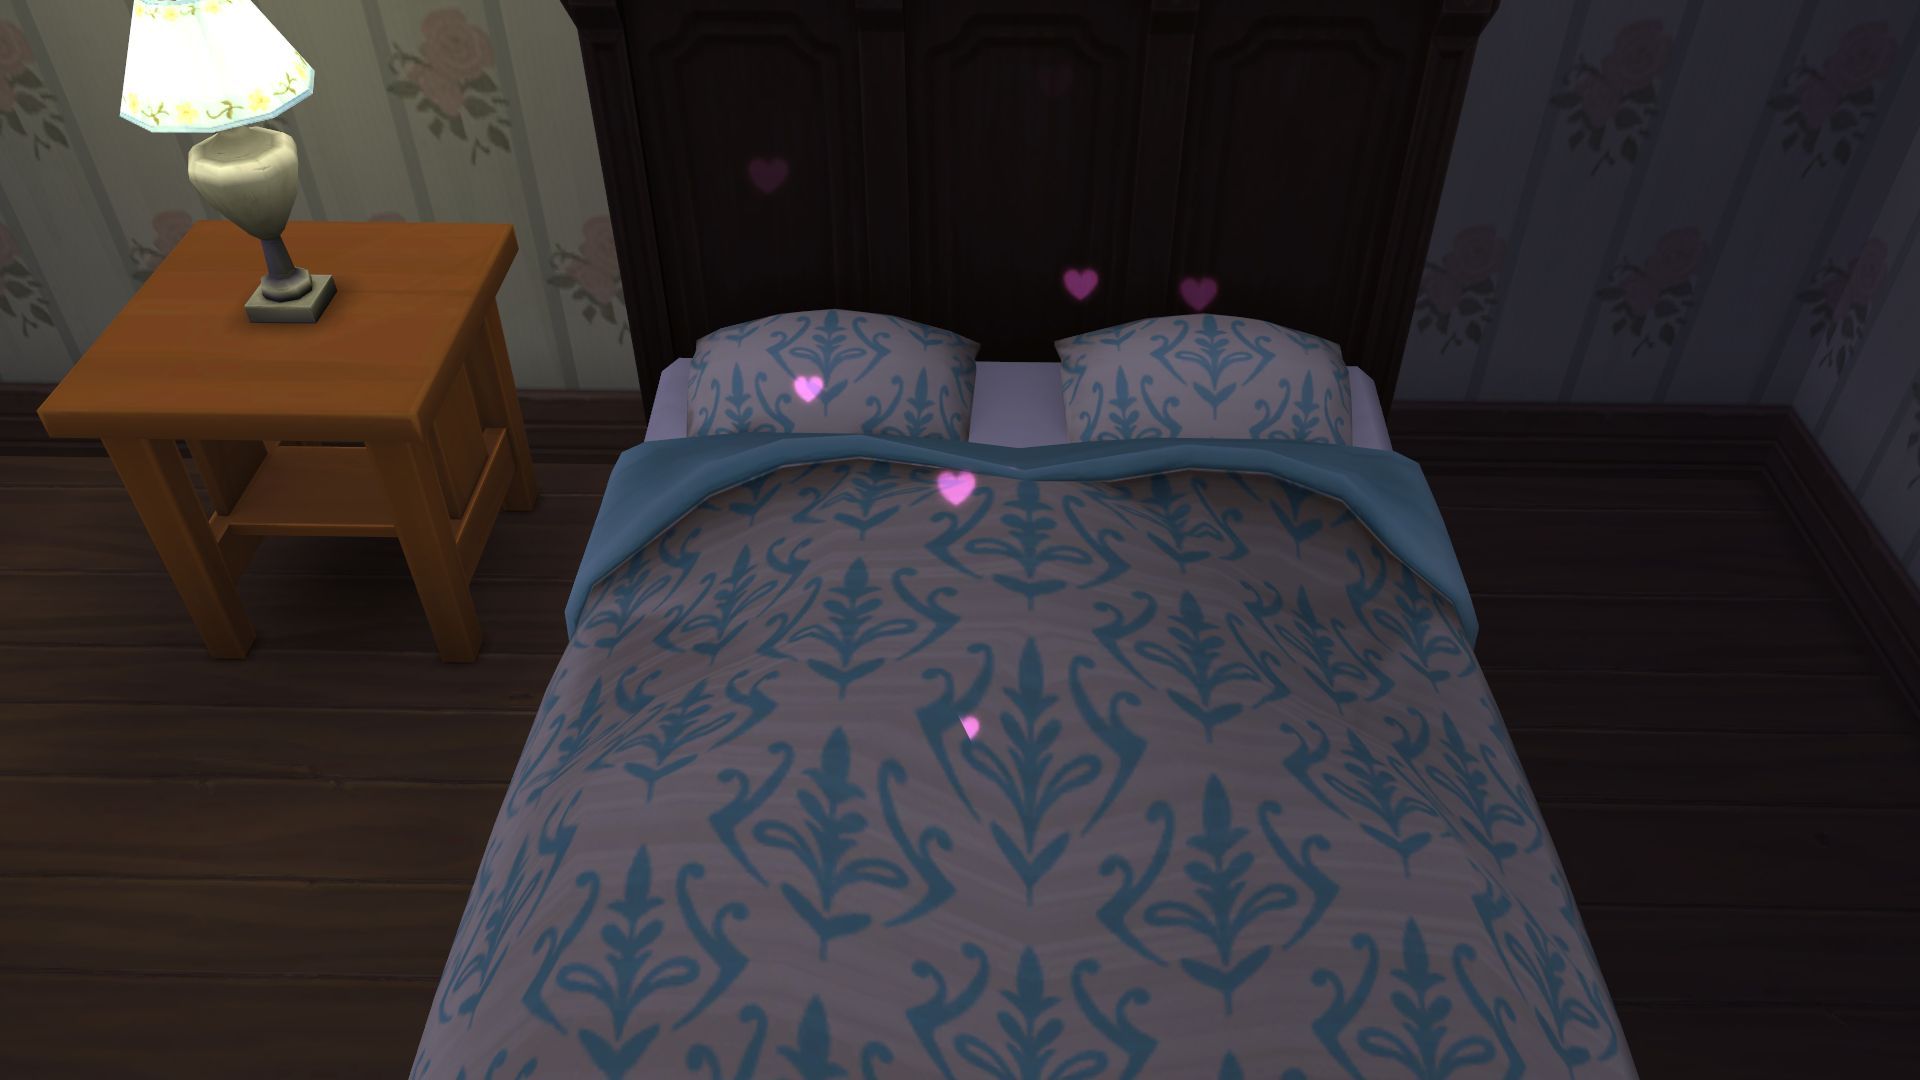 An image of a Sims 4 bed with hearts over it, implying that two sims are woohooing.